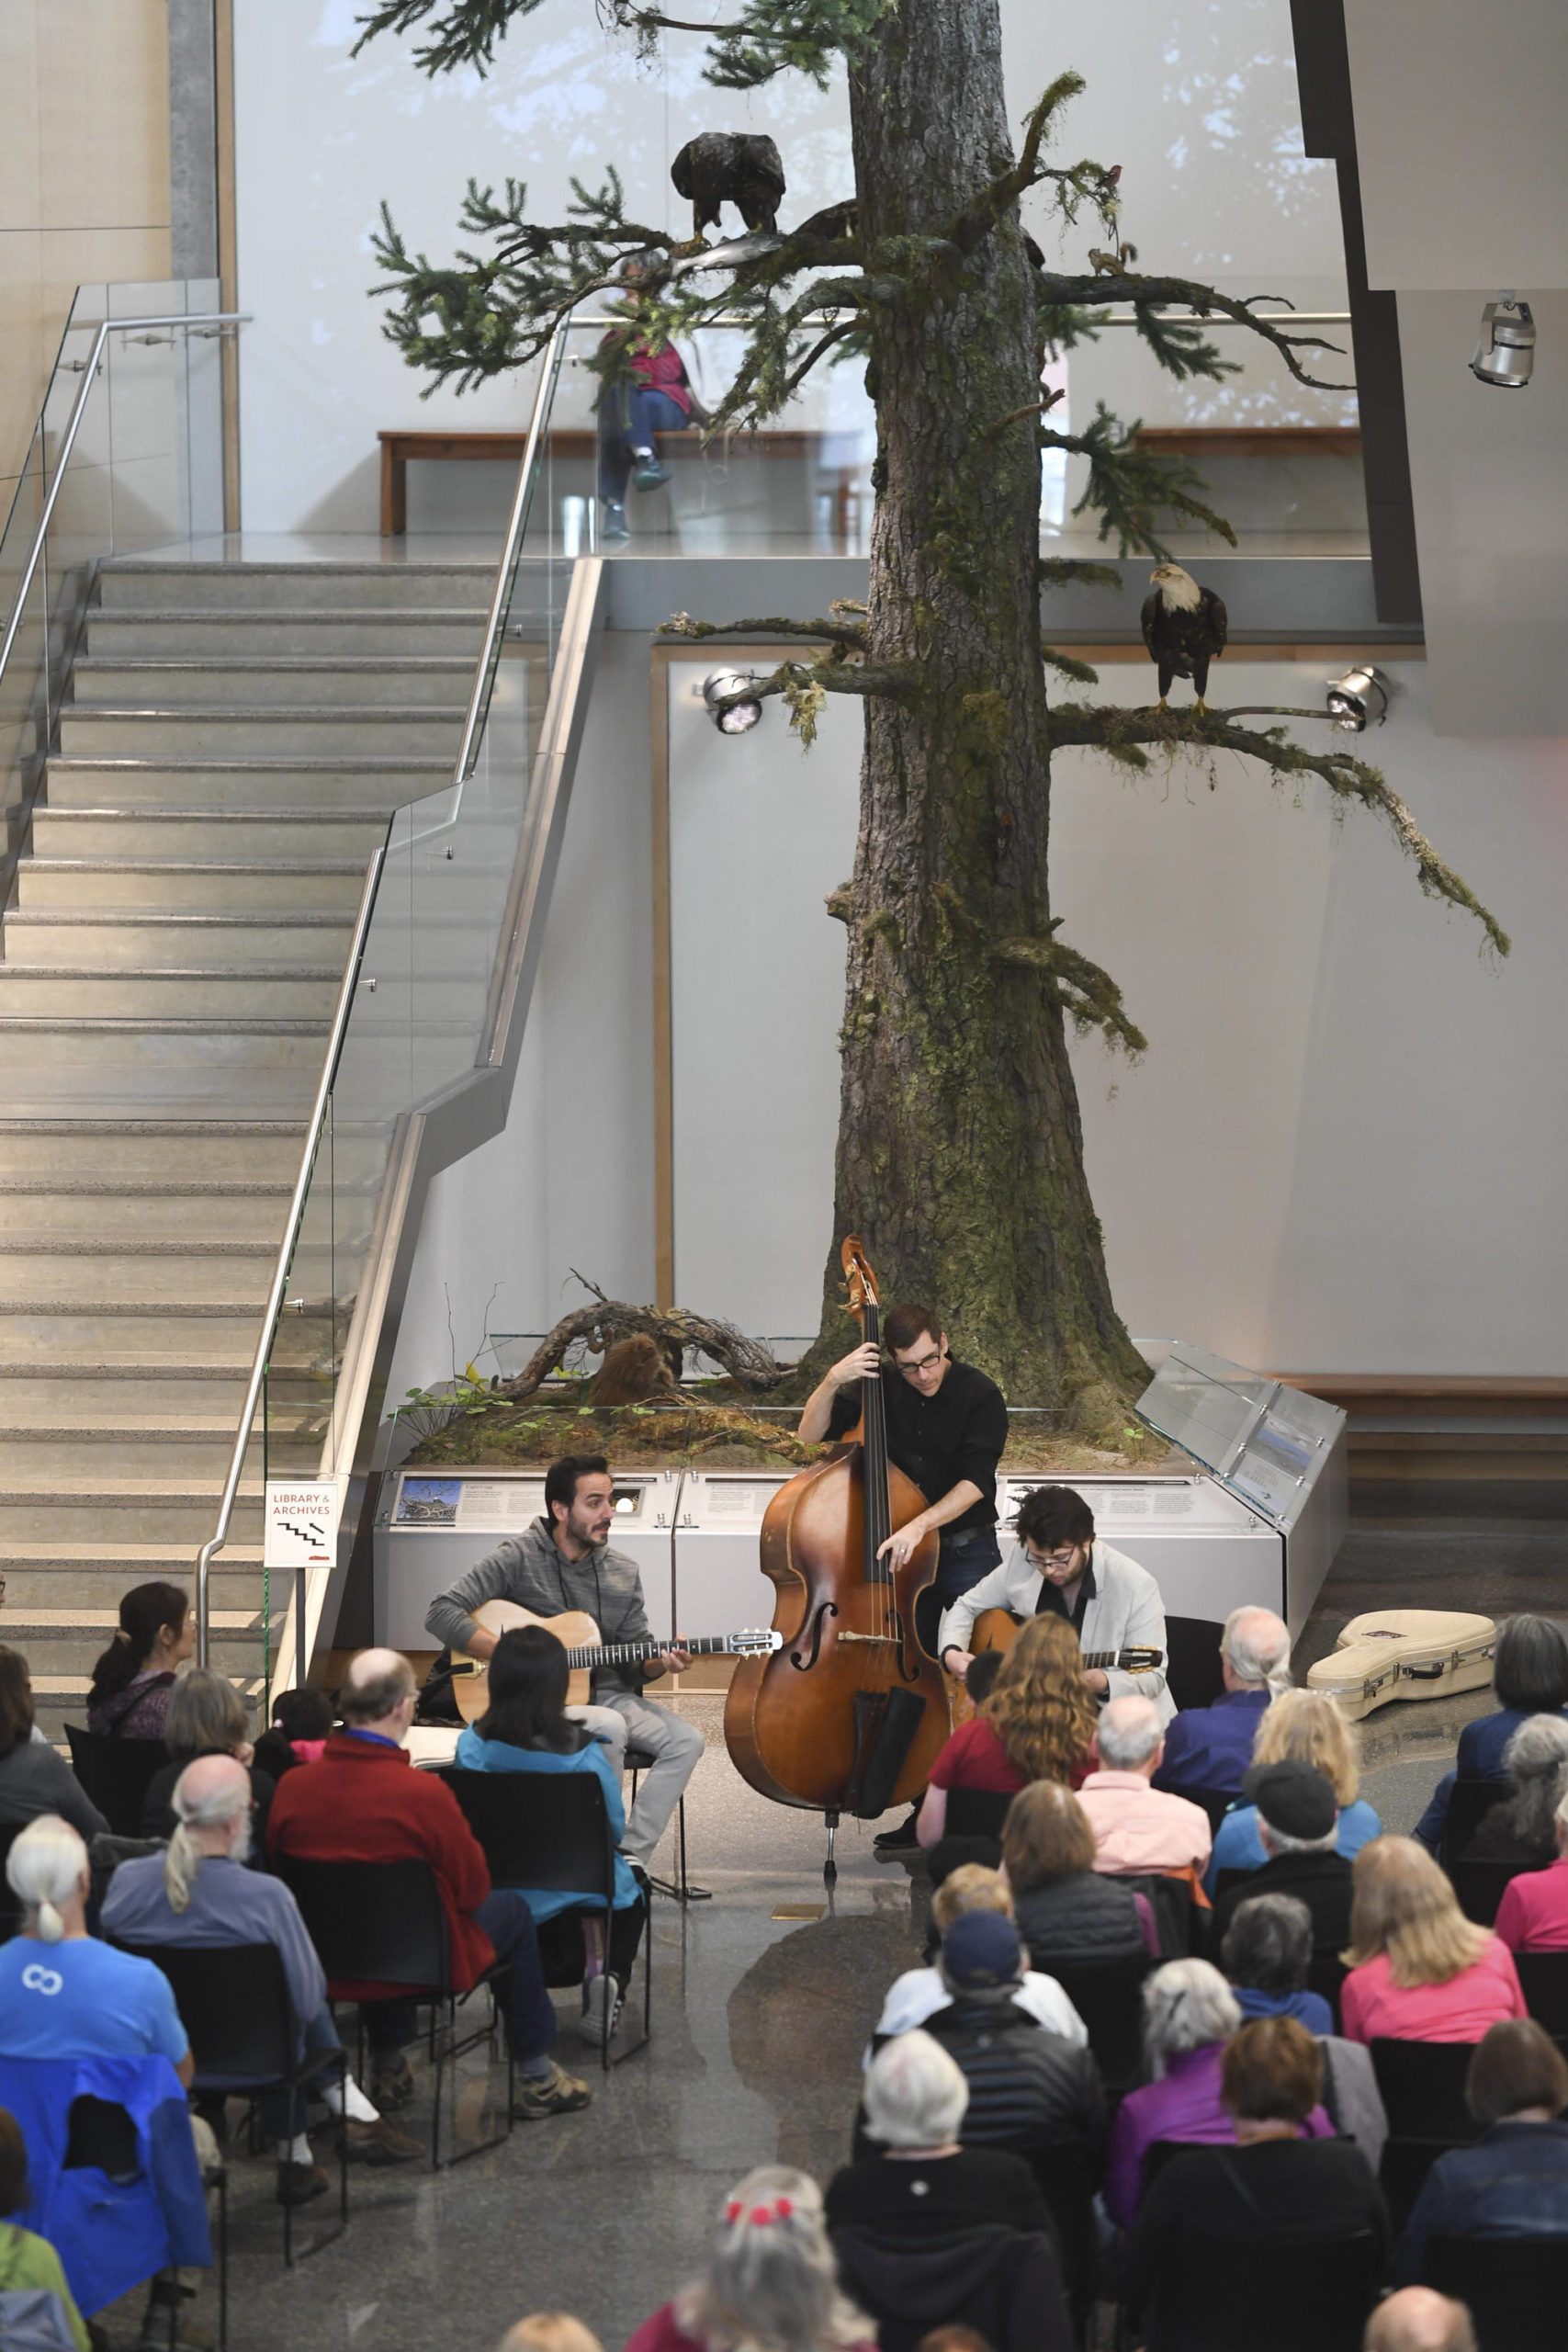 Michael Penn / Juneau Empire File
Members of the Gonzalo Bergara Trio perform in the atrium of the Andrew P. Kashevaroff Building as part of Juneau Jazz & Classics on May 10, 2019. Live, classical music will return to Juneau next week as the popular festival resumes in-person concerts to sell-out crowds. If you don’t have tickets, you can still partake in the free, outdoor concerts, workshops or virtual elements.